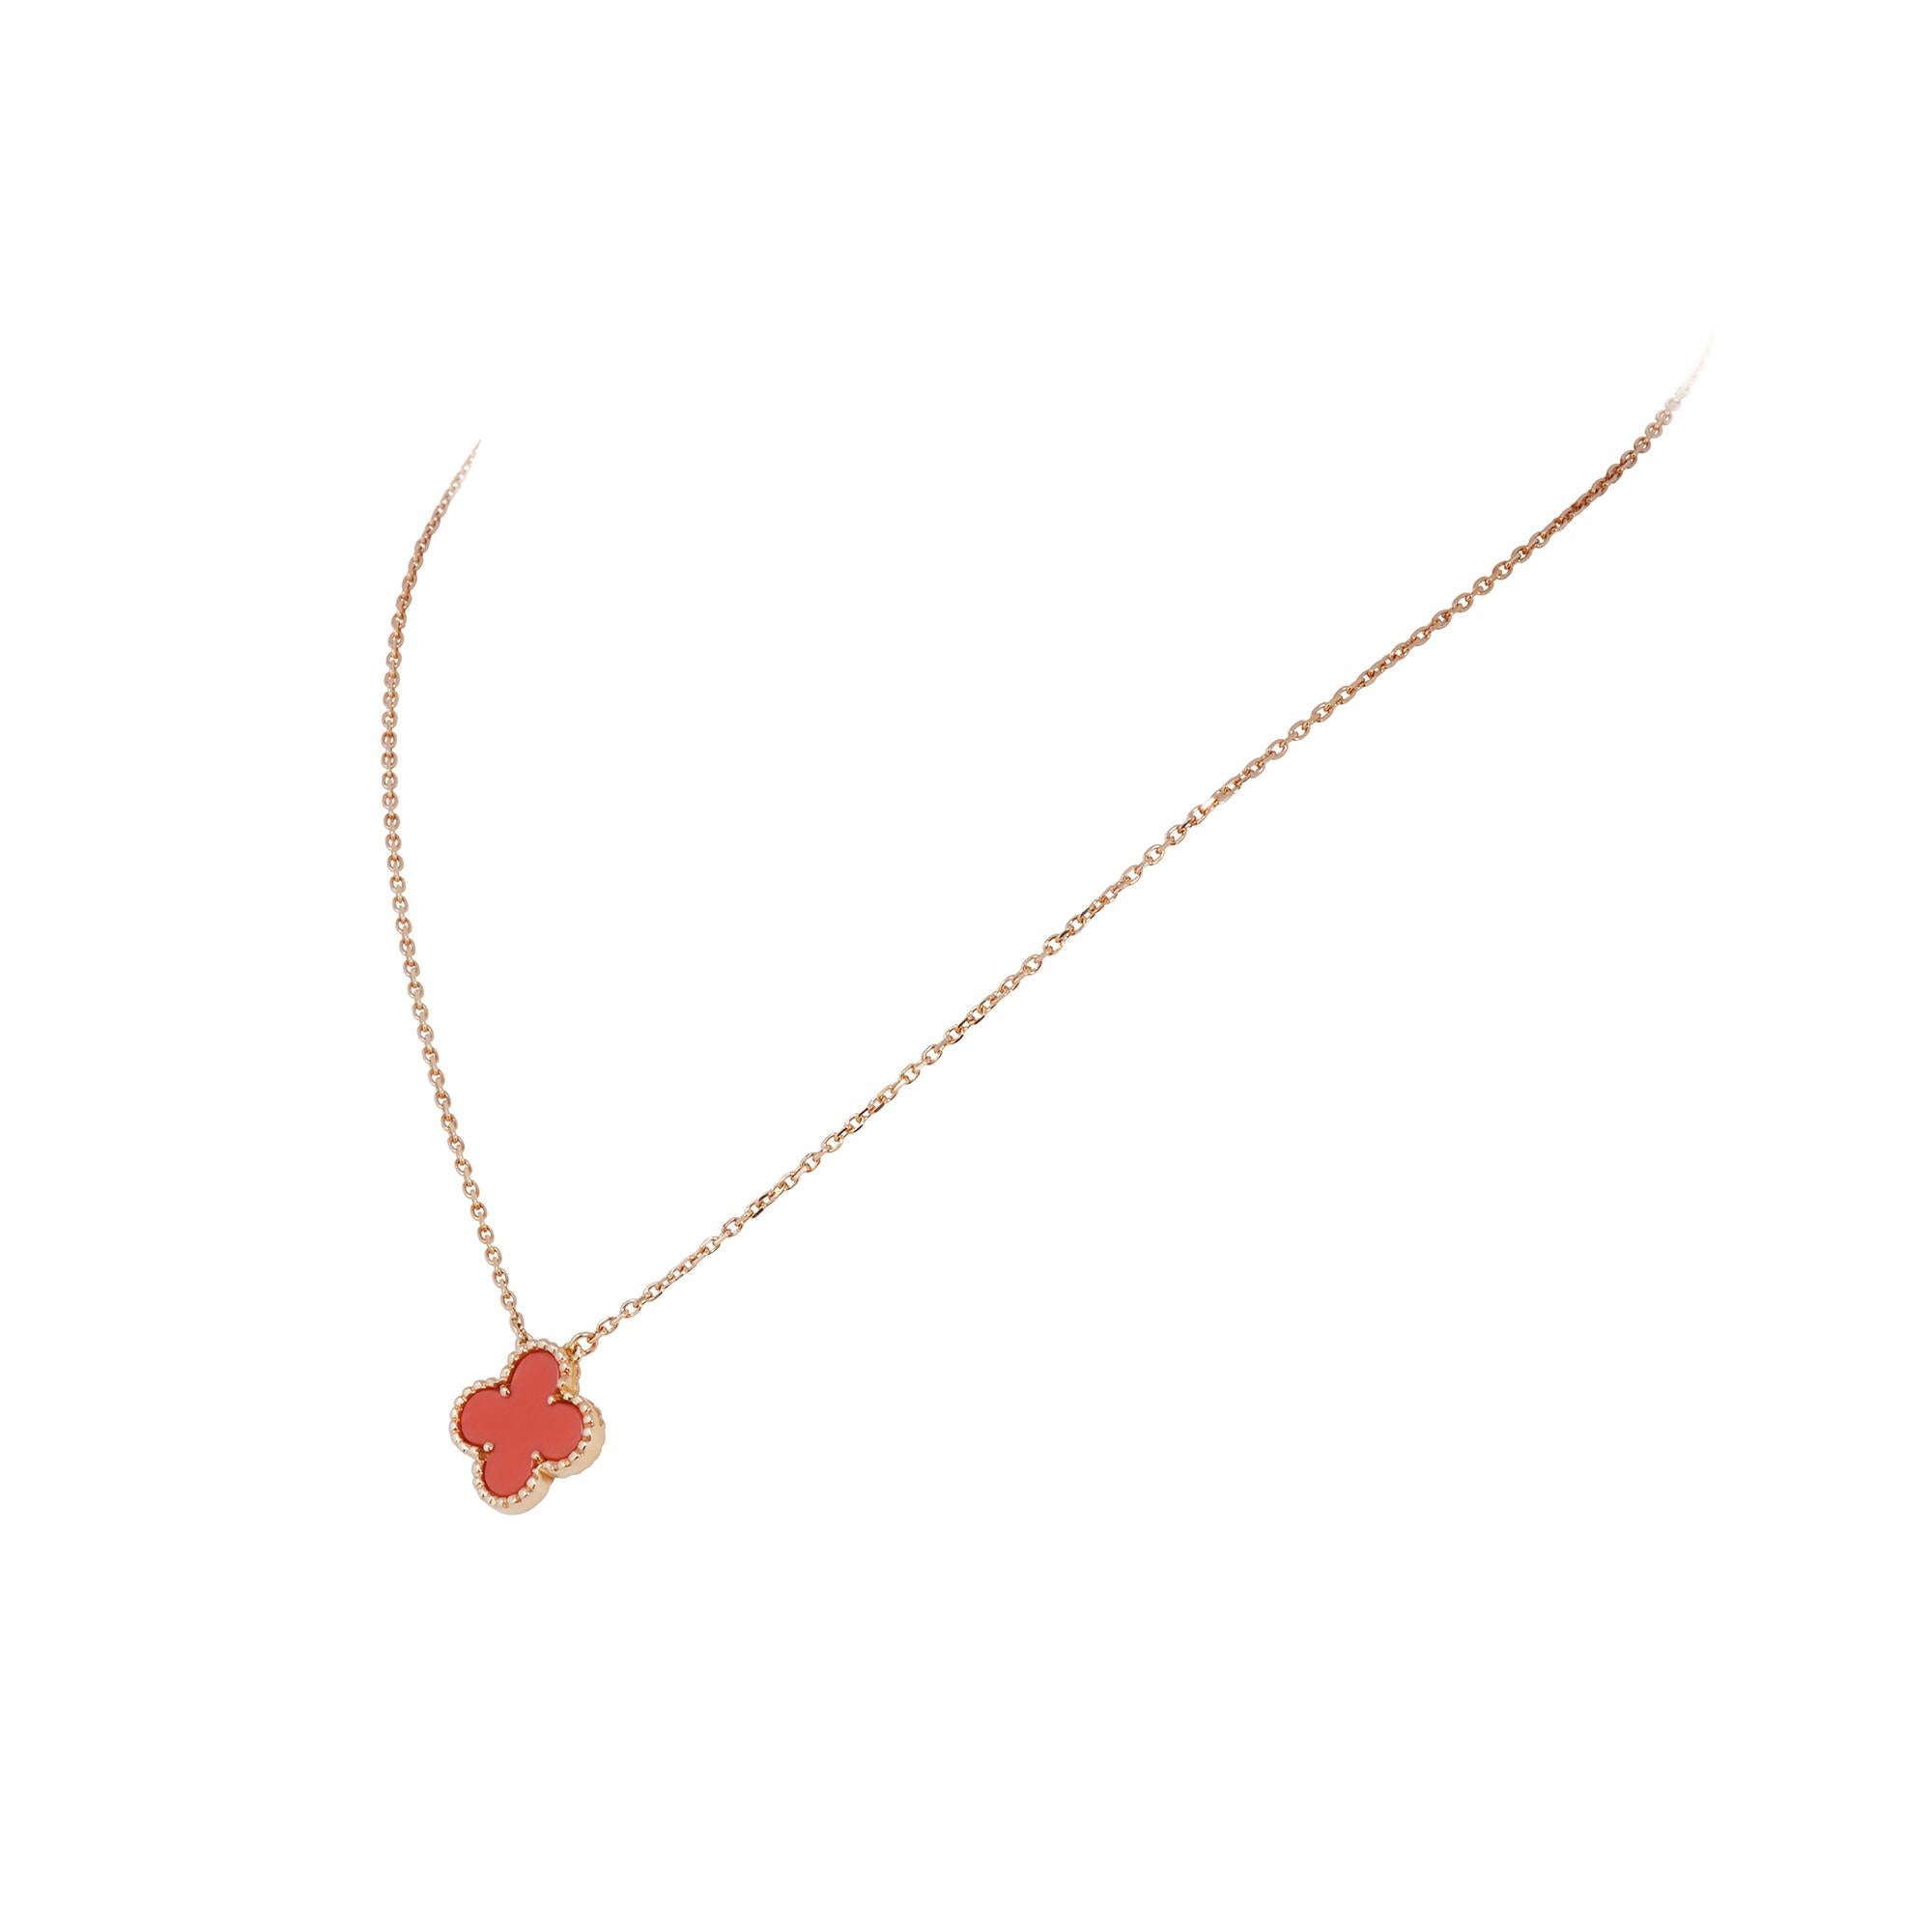 Authentic Van Cleef & Arpels 'Vintage Alhambra' necklace crafted in 18 karat yellow gold and featuring one clover-shaped motif in carved coral. The pendant hangs from a 16 3/4 inch adjustable chain.  Signed VCA, Au750, with serial number and French